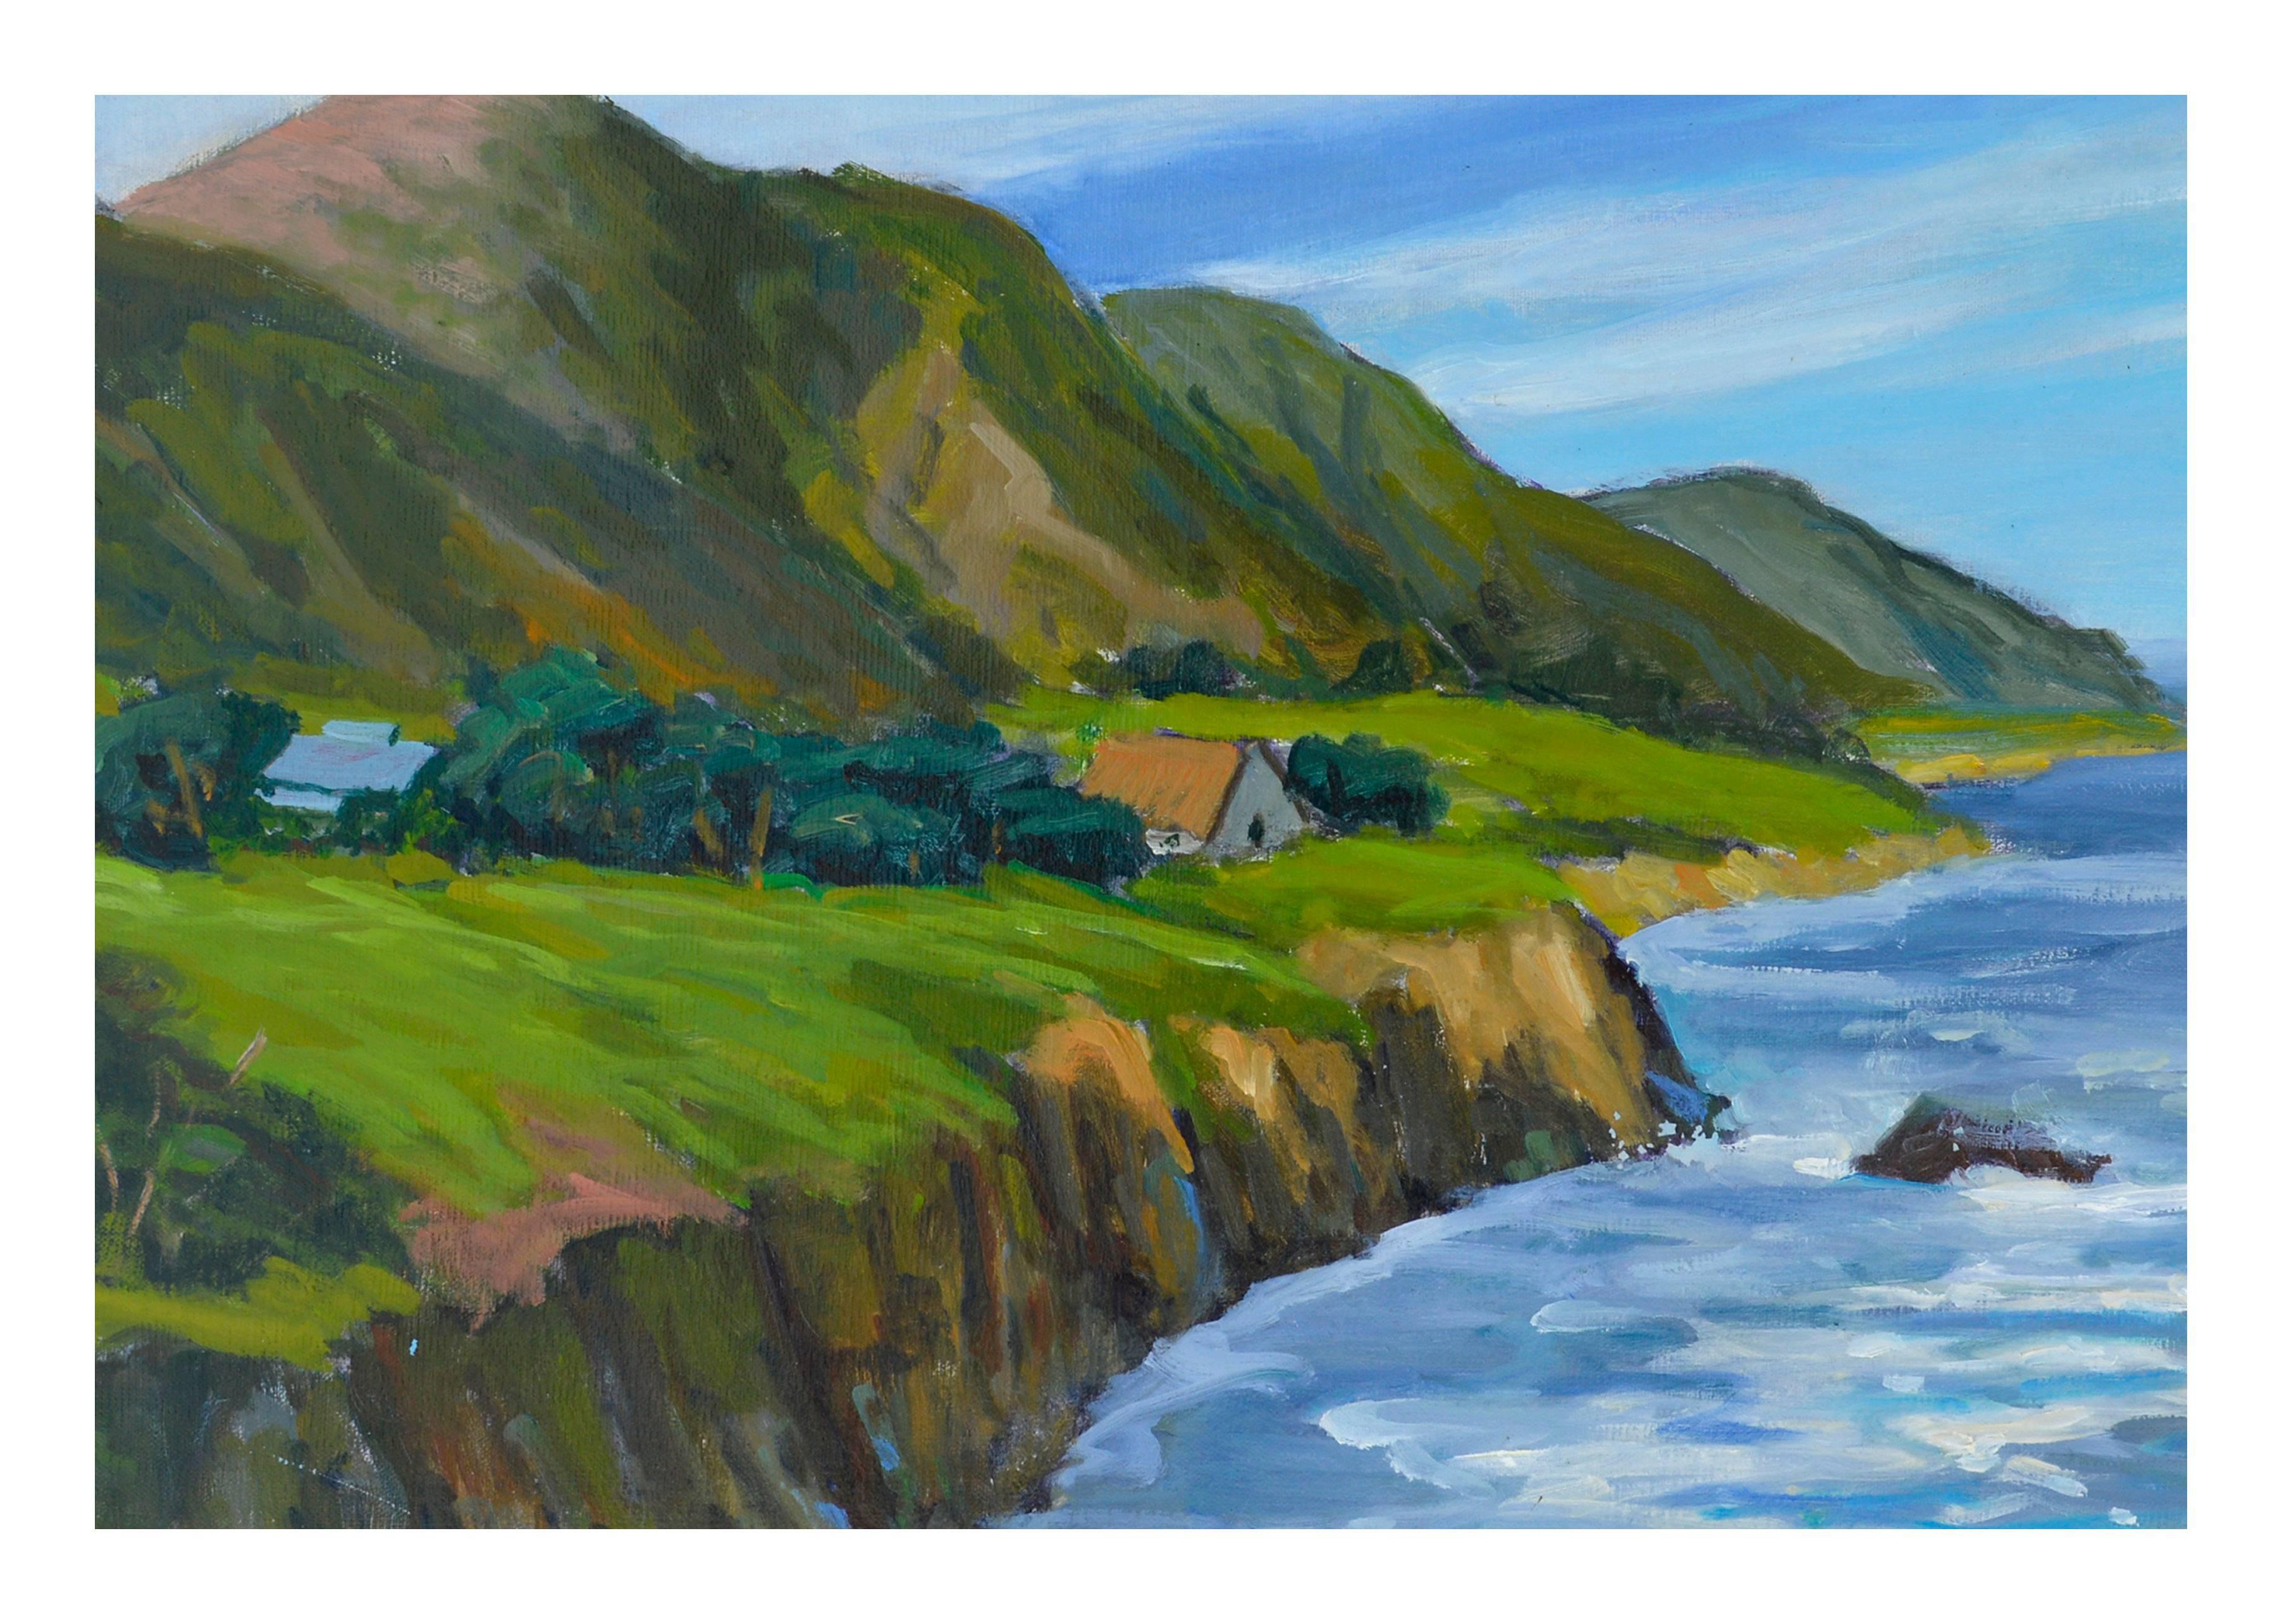 Big Sur Coastal Farm by California artist Ray Barton (American, 1918-1988). Ray Barton specialized in plein air paintings of Carmel Valley, Monterey and Pacific Grove. He lived on Grace Street during the 60's-80's in Monterey near the Presidio.